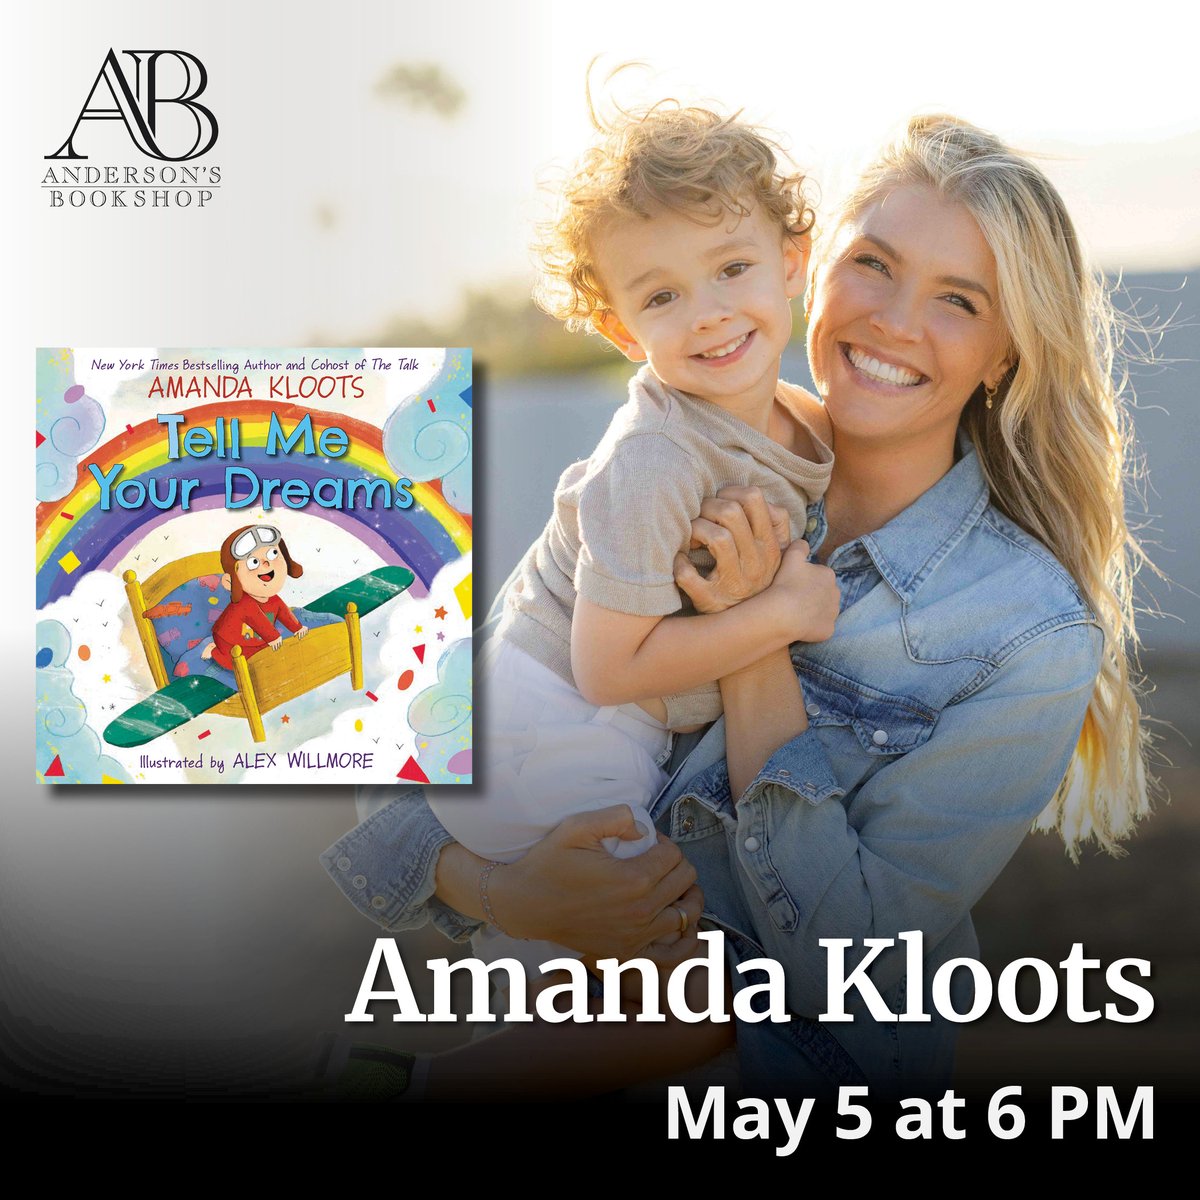 RECENTLY ANNOUNCED 5/5: An in-person event with author Amanda Kloots @amandakloots to celebrate her picture book Tell Me Your Dreams, on Friday, May 5th at 6:00 pm in Naperville. This will be a signing/personalization/photo line only event. TICKETS: AmandaKlootsAndersons.eventcombo.com